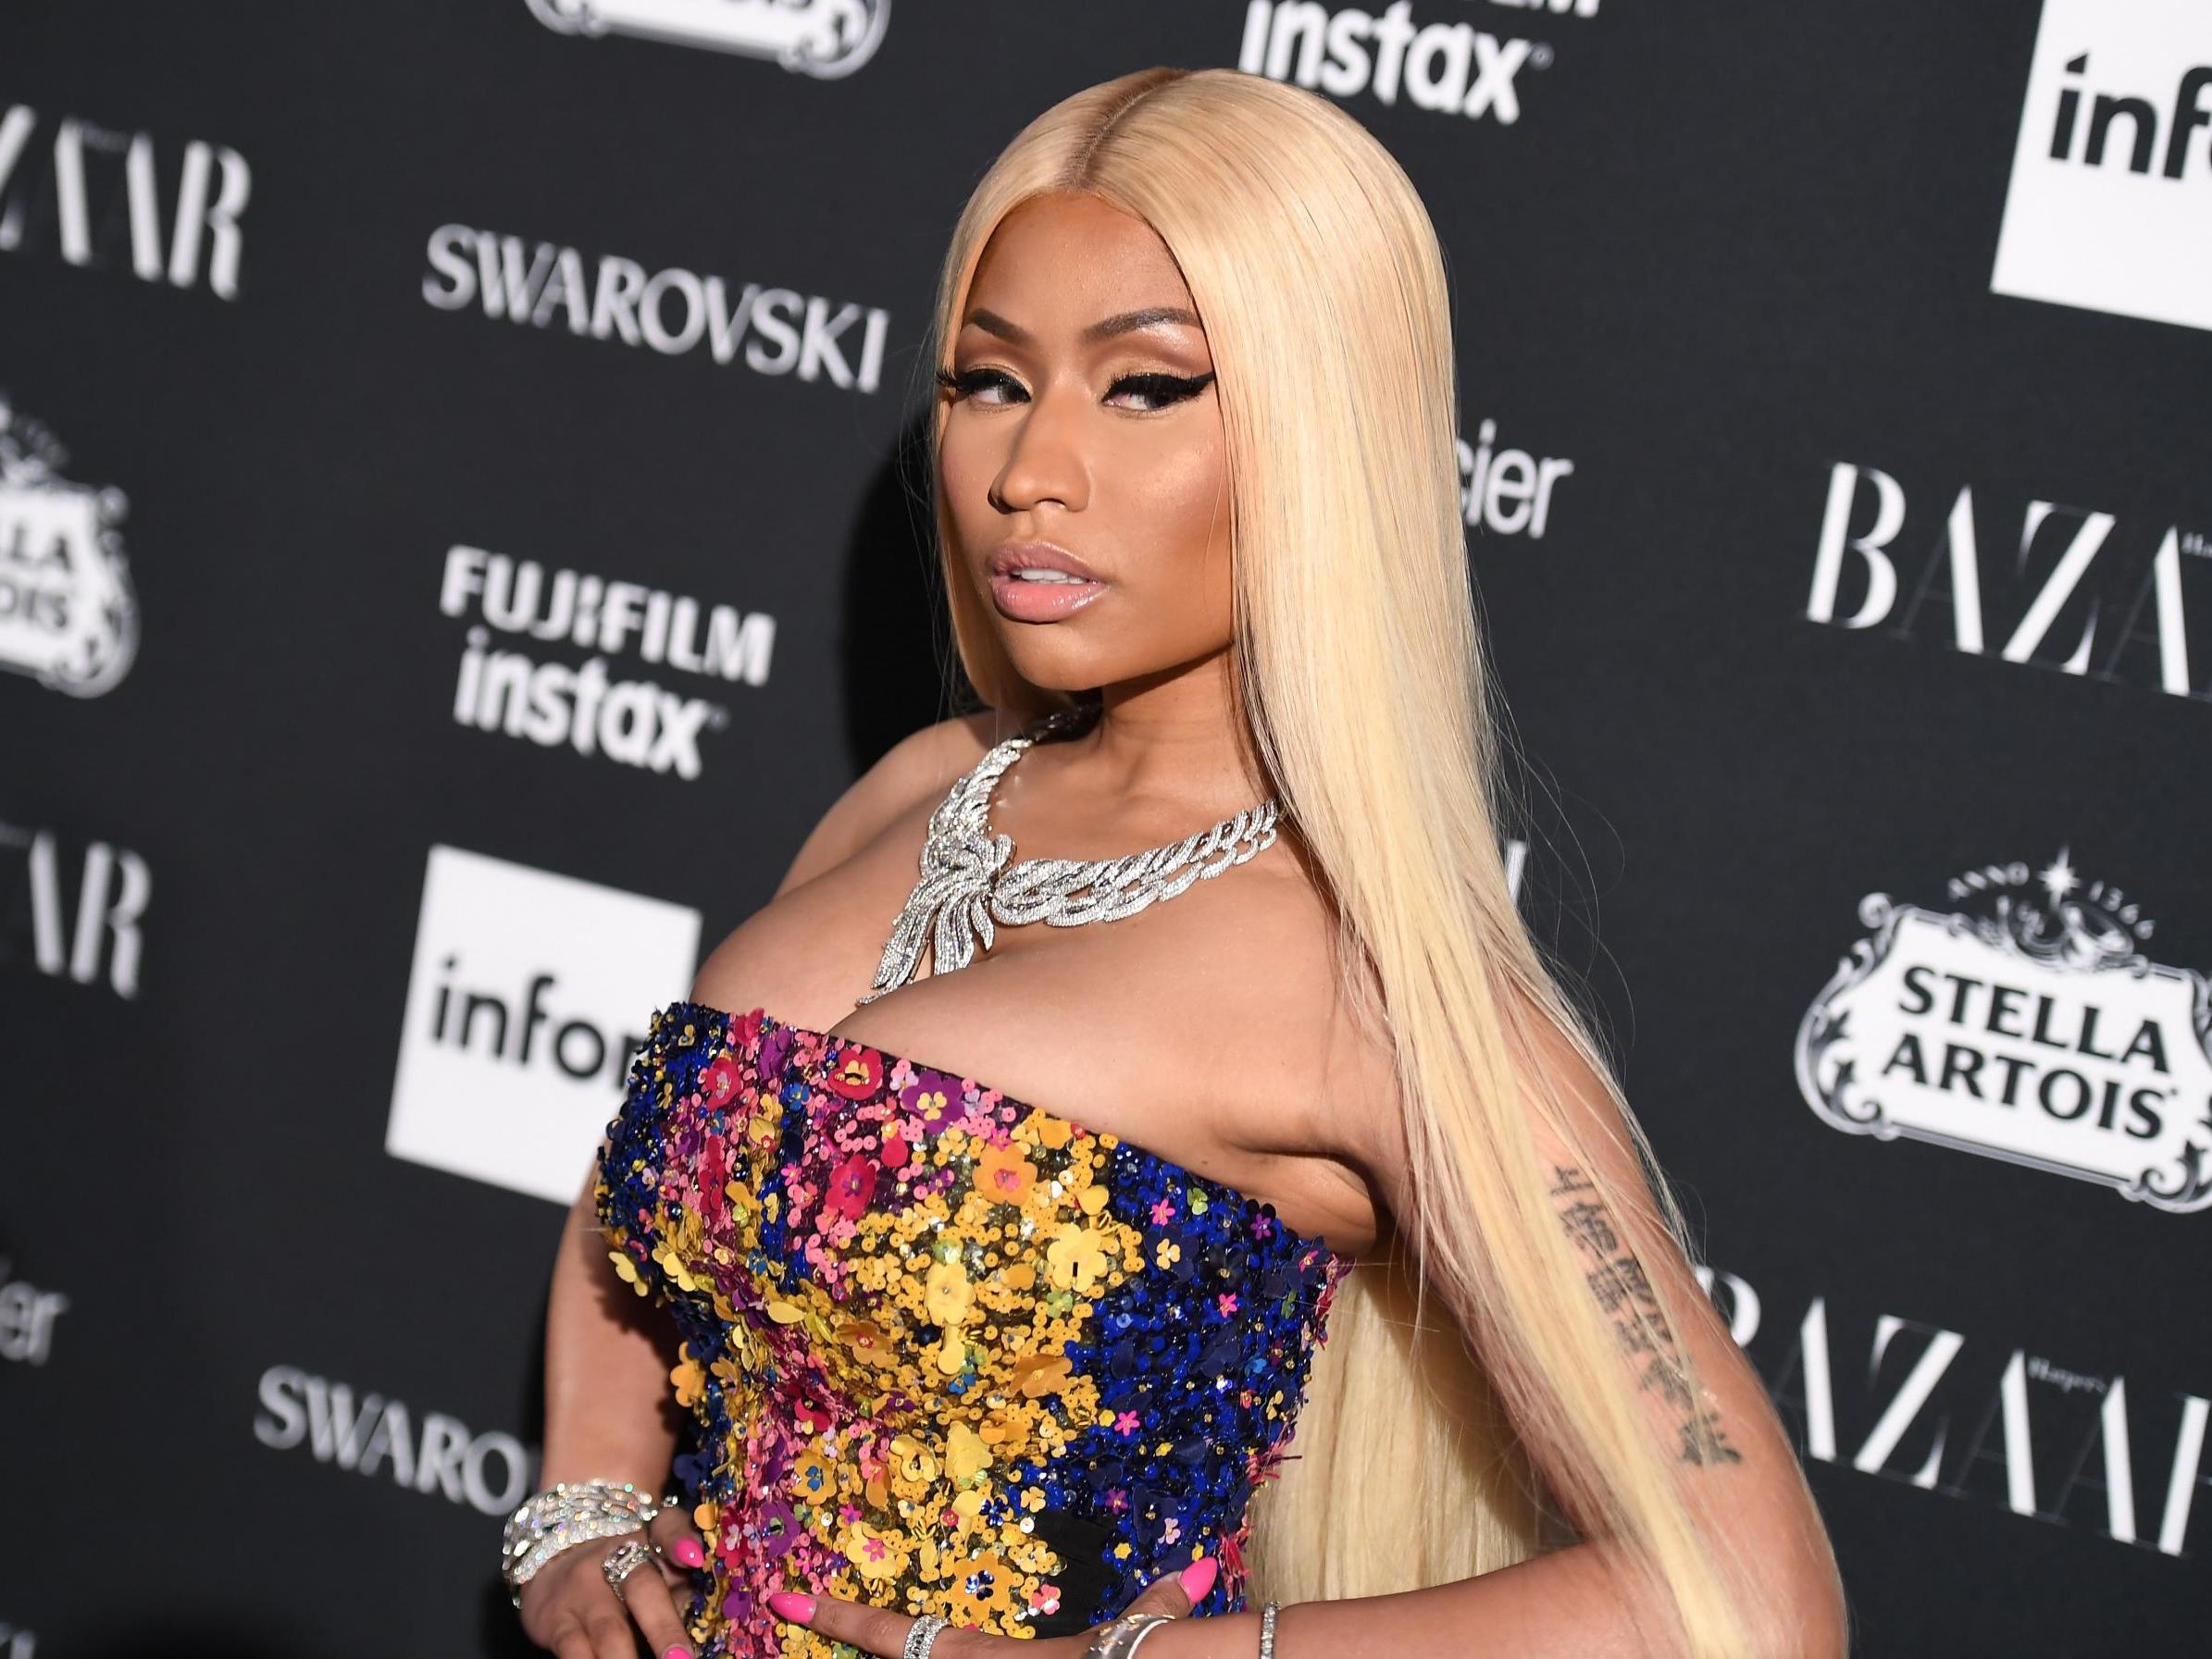 Minaj has rubbished claims by her ex-boyfriend she stabbed him while they were together